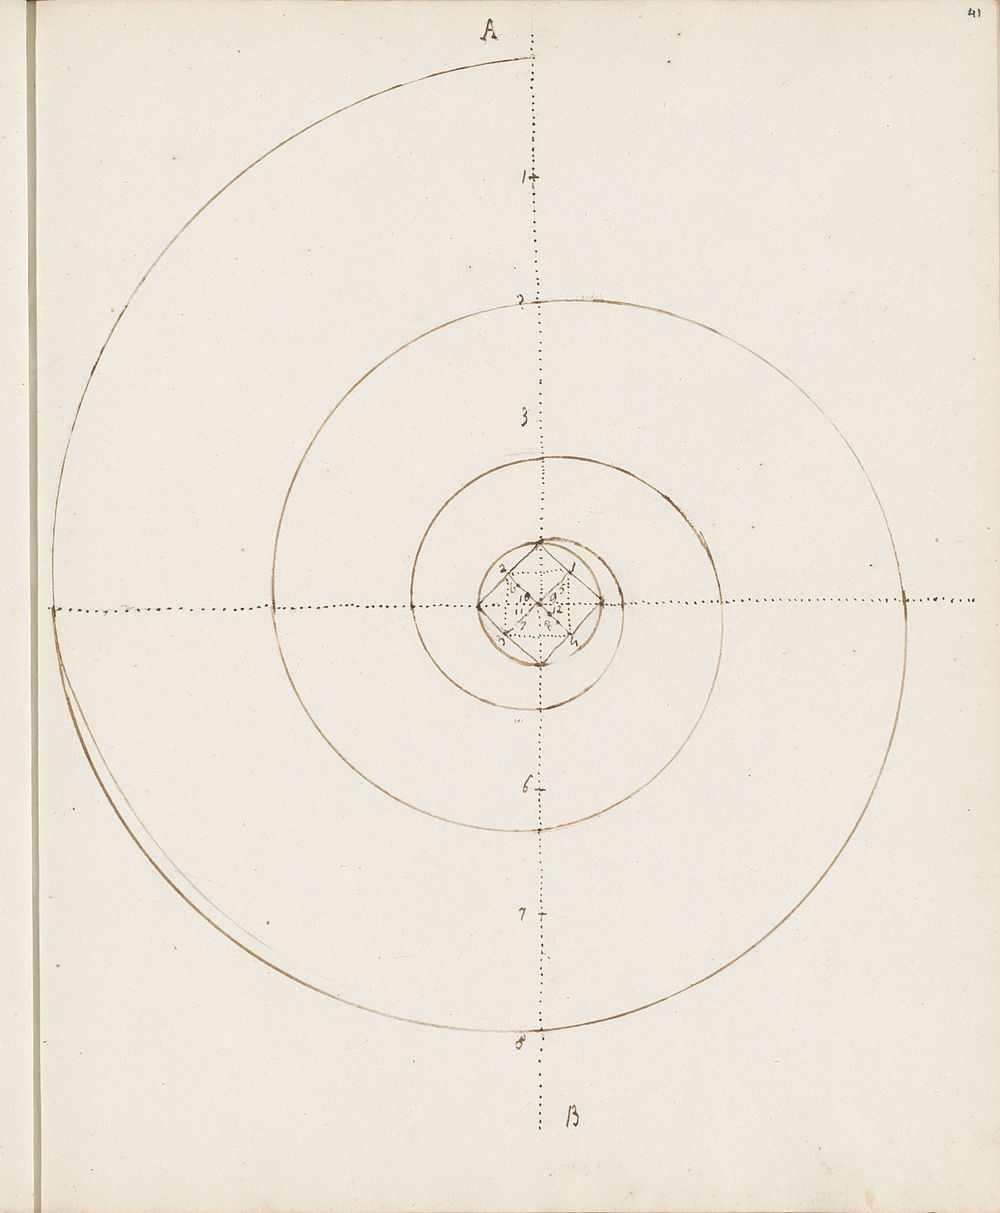 Perspectiefoefening (1813) by Catharina Kemper and jonkvrouw Elisabeth Kemper